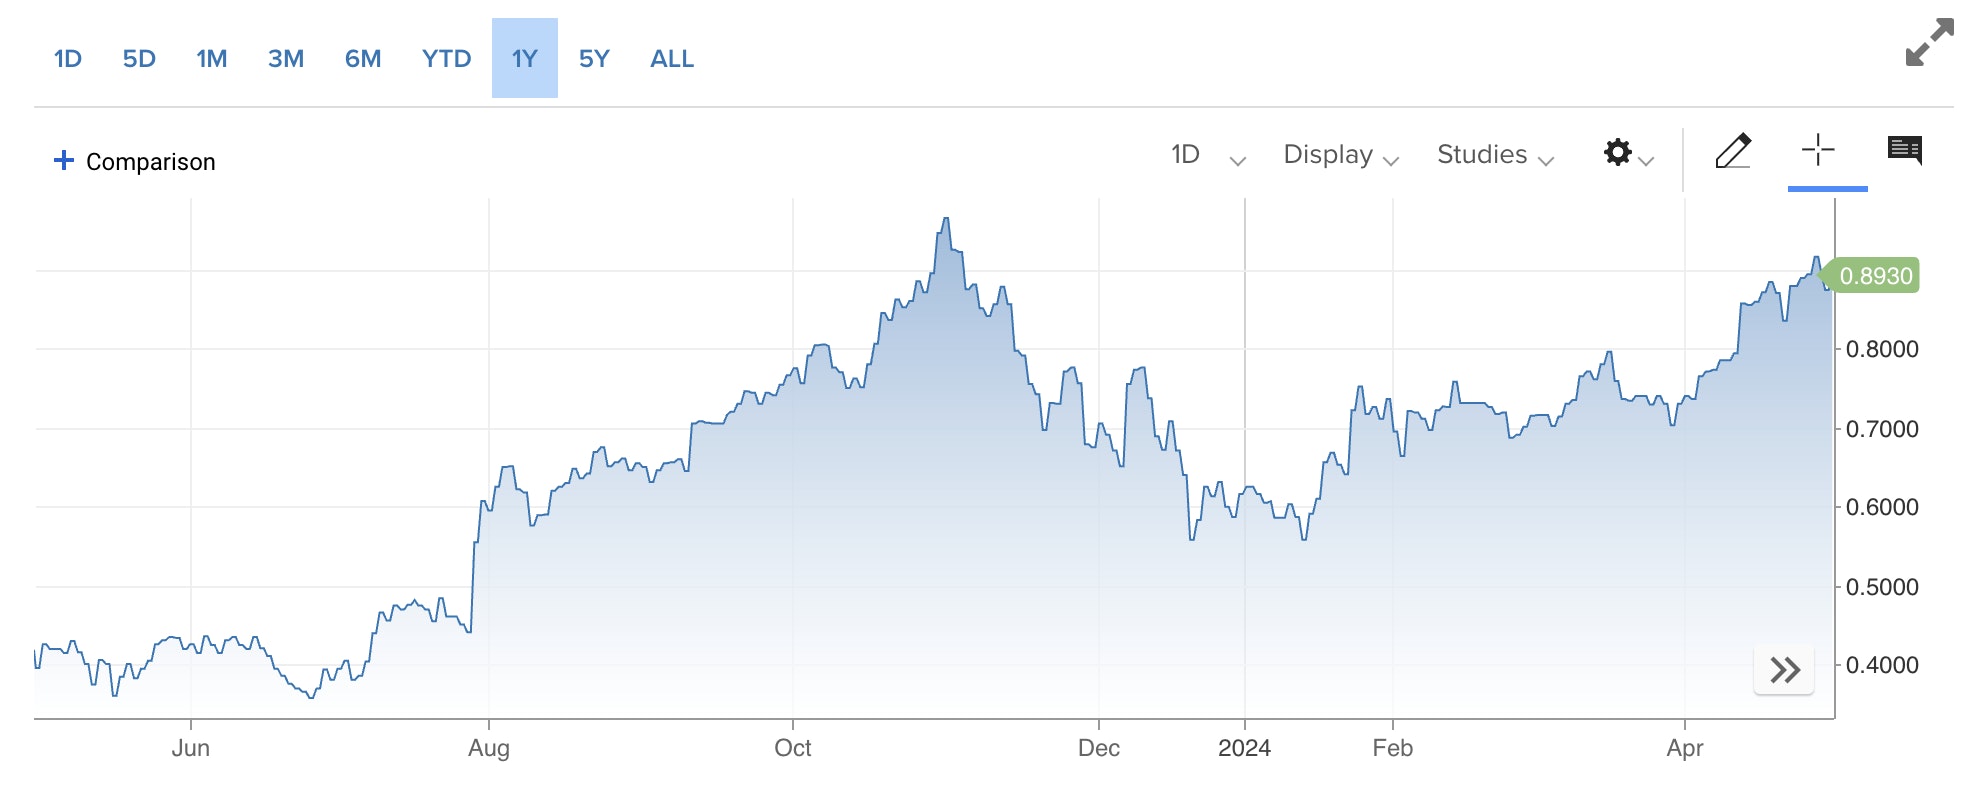 10 year Japan interest rate chart